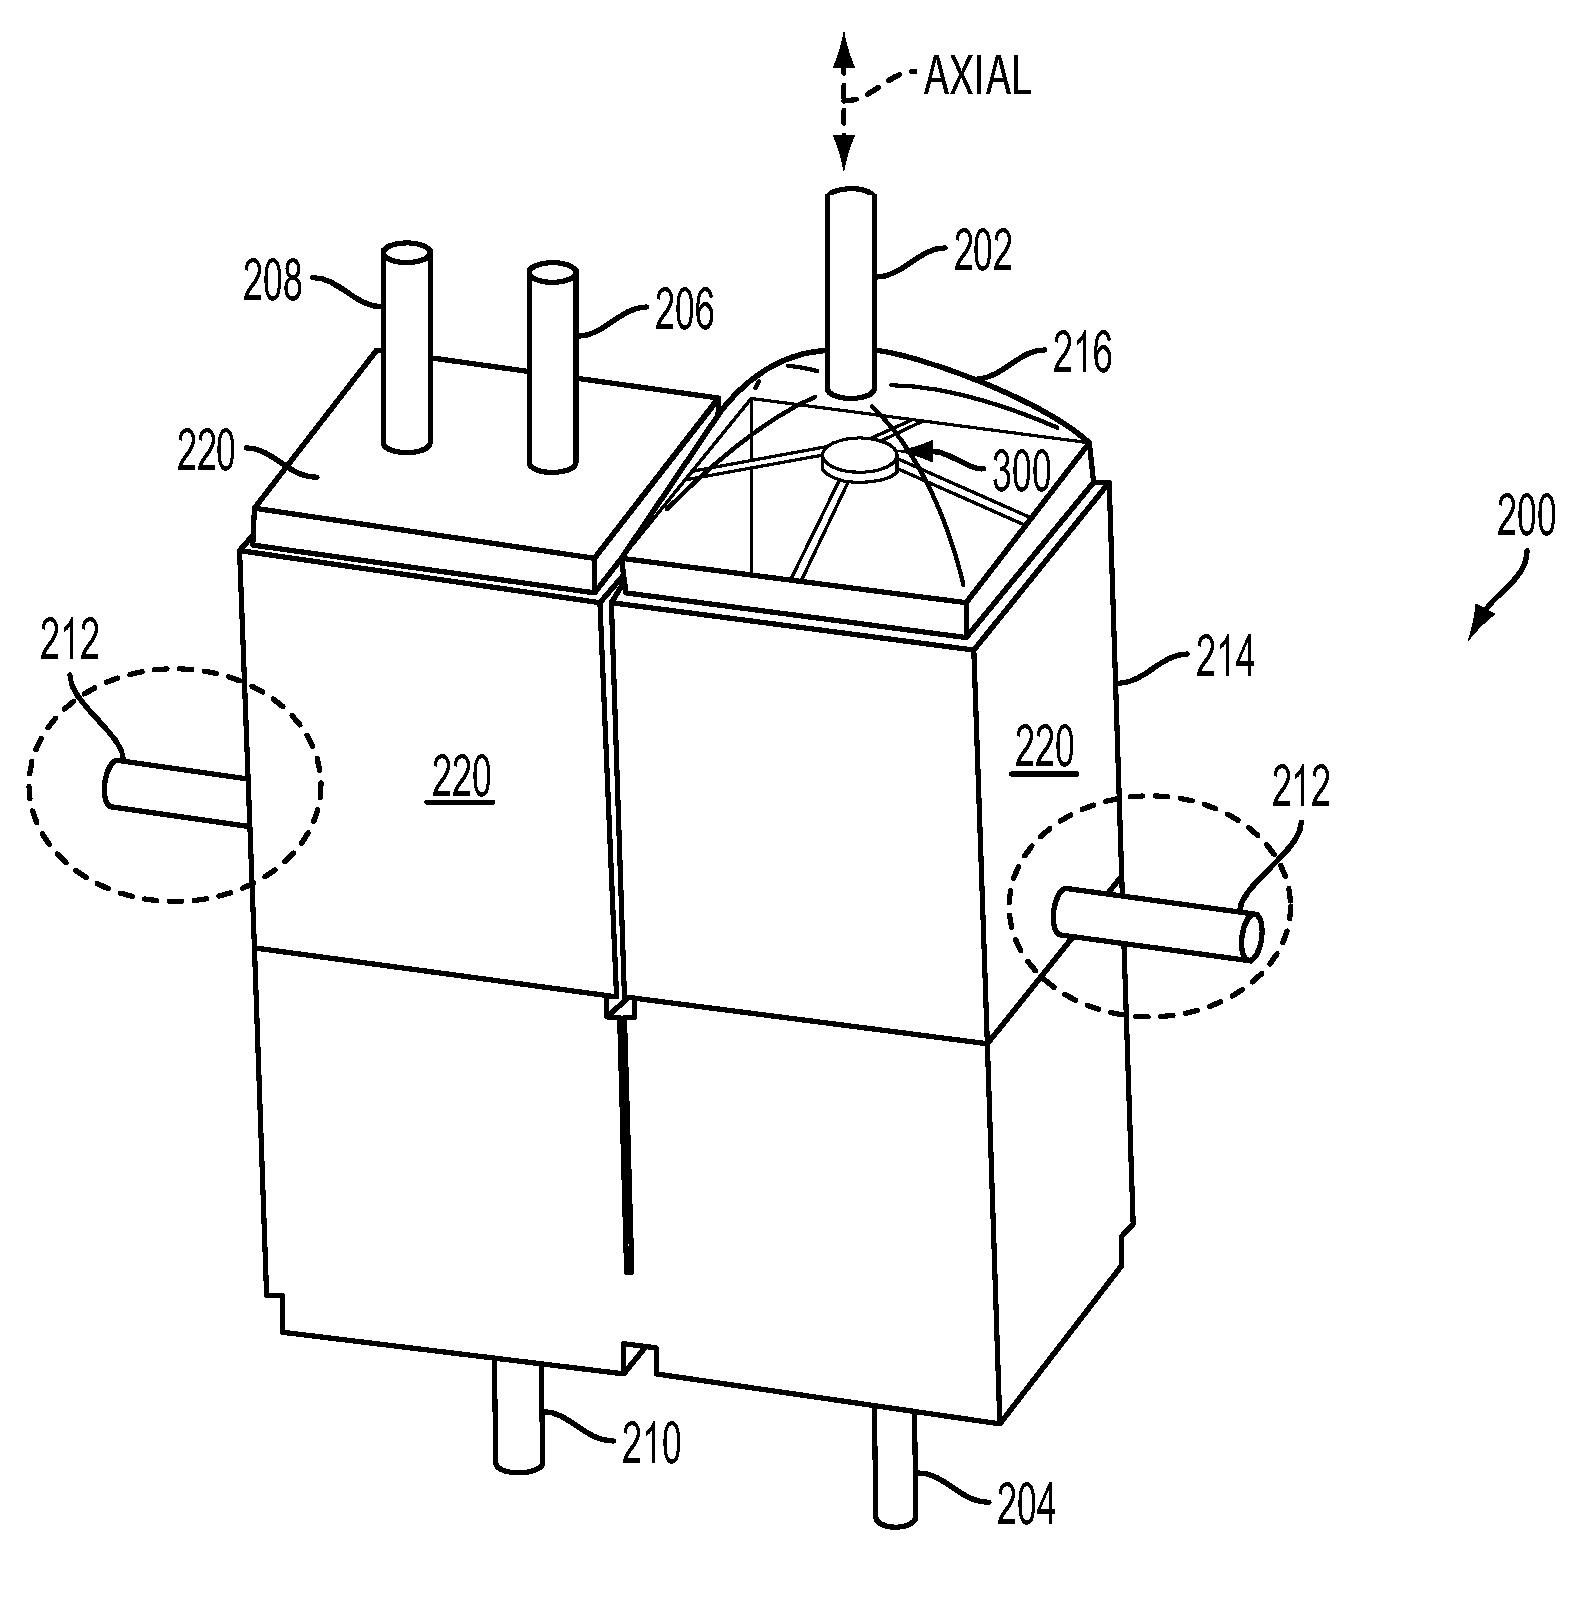 Vapor storage device having a diffuser plate and dome